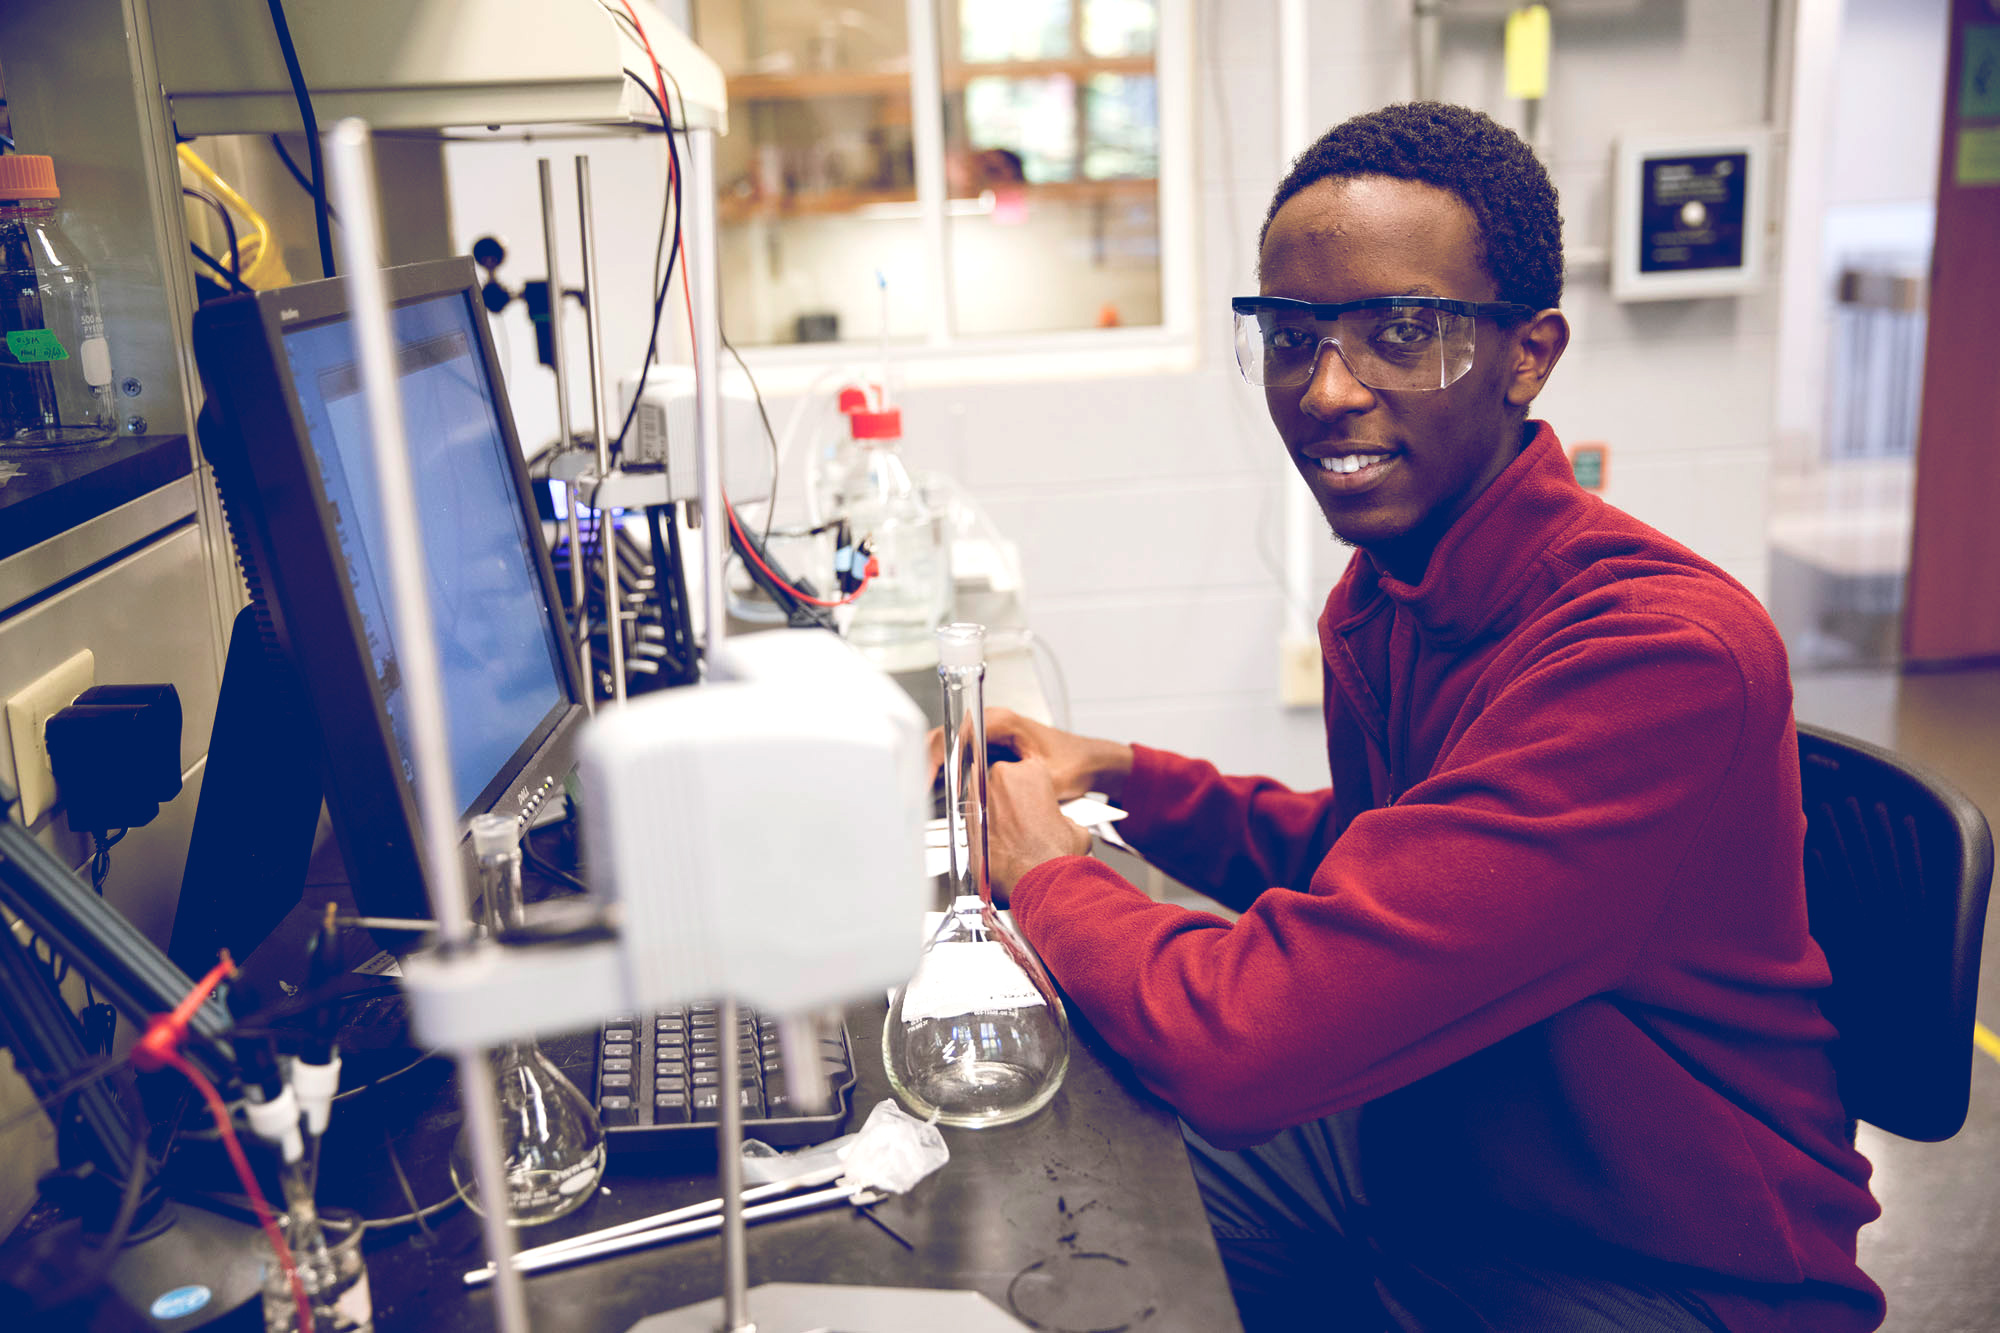 Kevin Bahati smiles at the camera in a lab